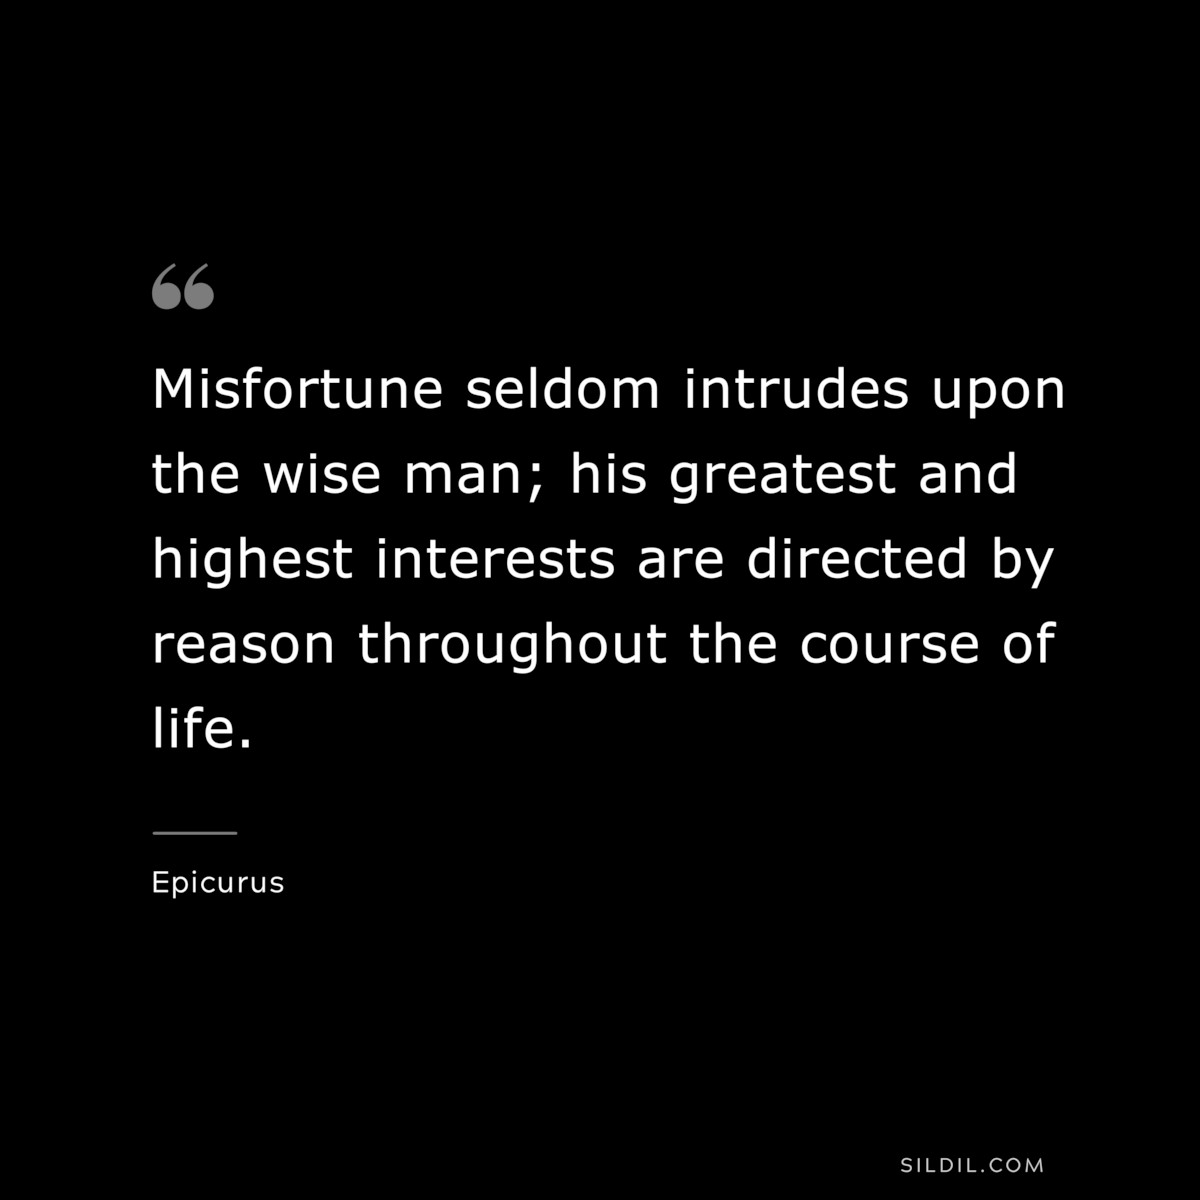 Misfortune seldom intrudes upon the wise man; his greatest and highest interests are directed by reason throughout the course of life. — Epicurus